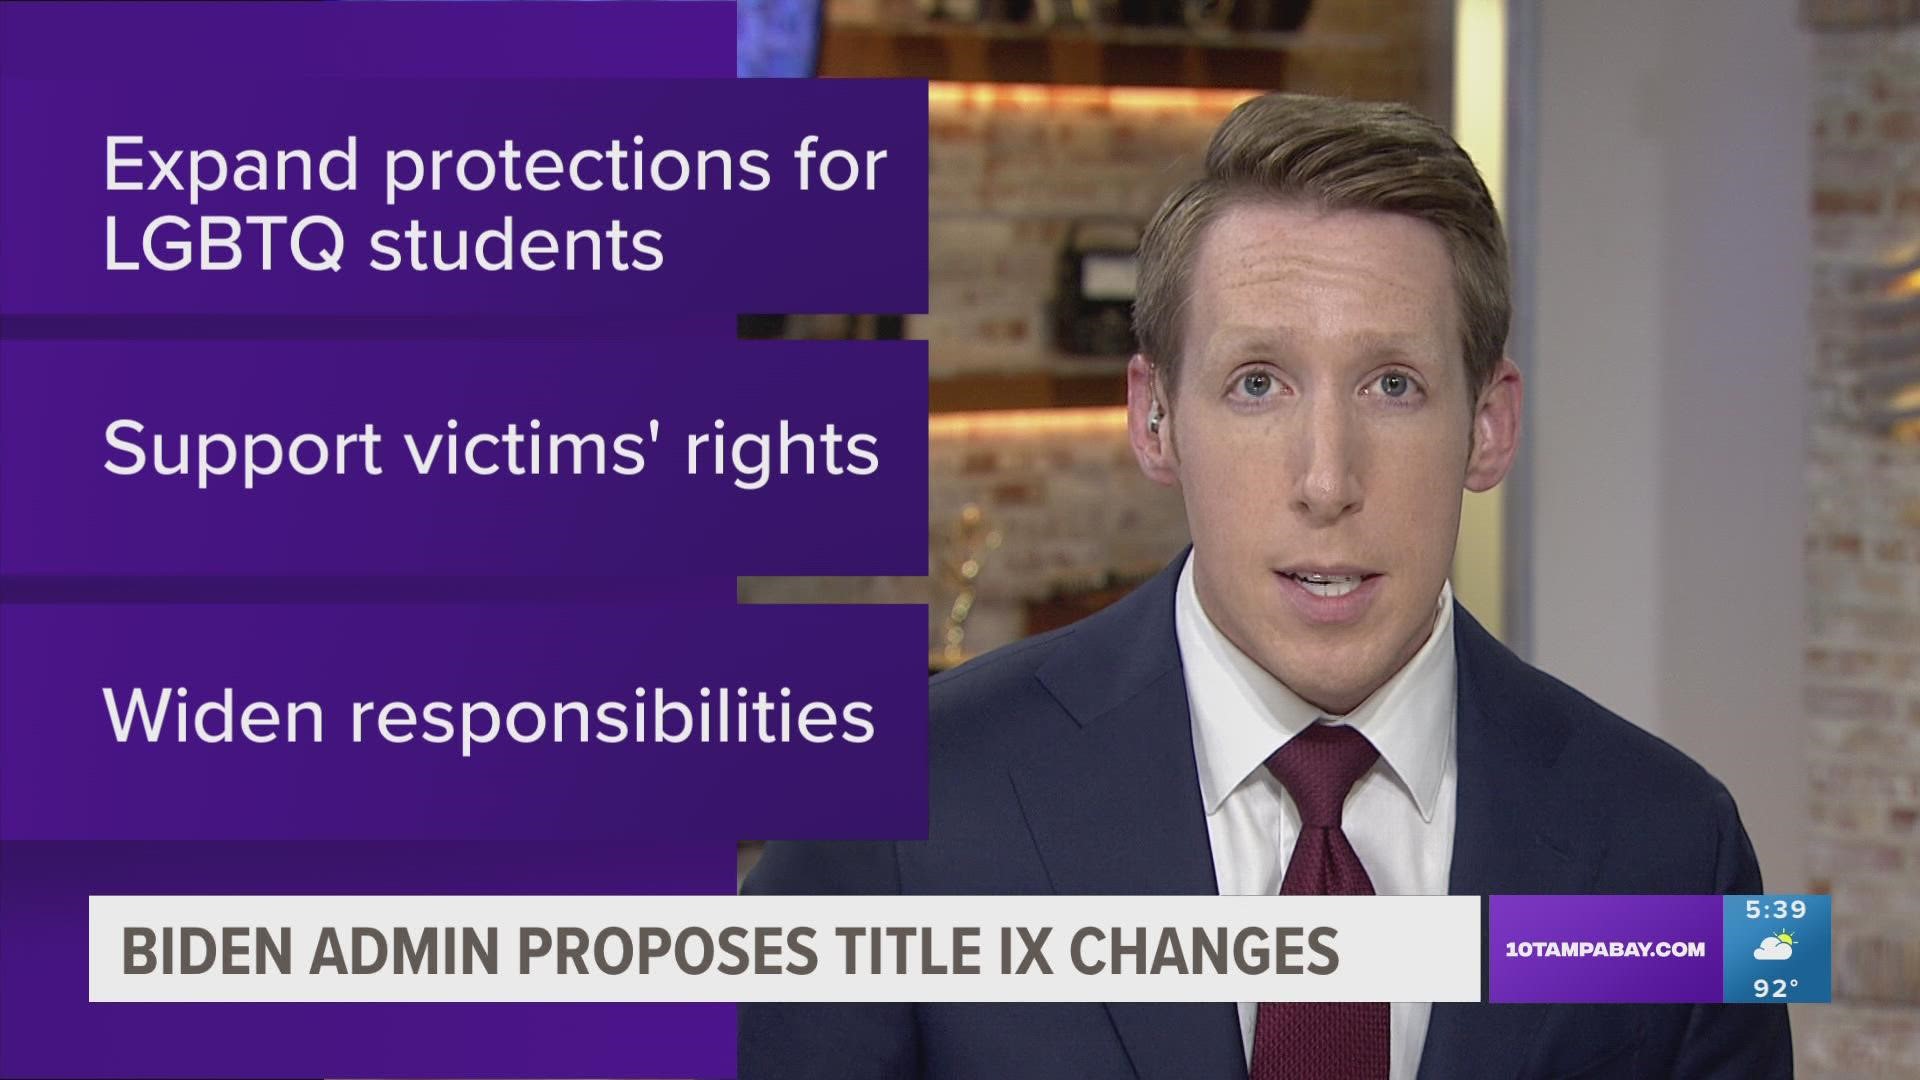 The proposal comes on the 50th anniversary of the Title IX women’s rights law and is meant to replace controversial rules issued during the Trump administration.